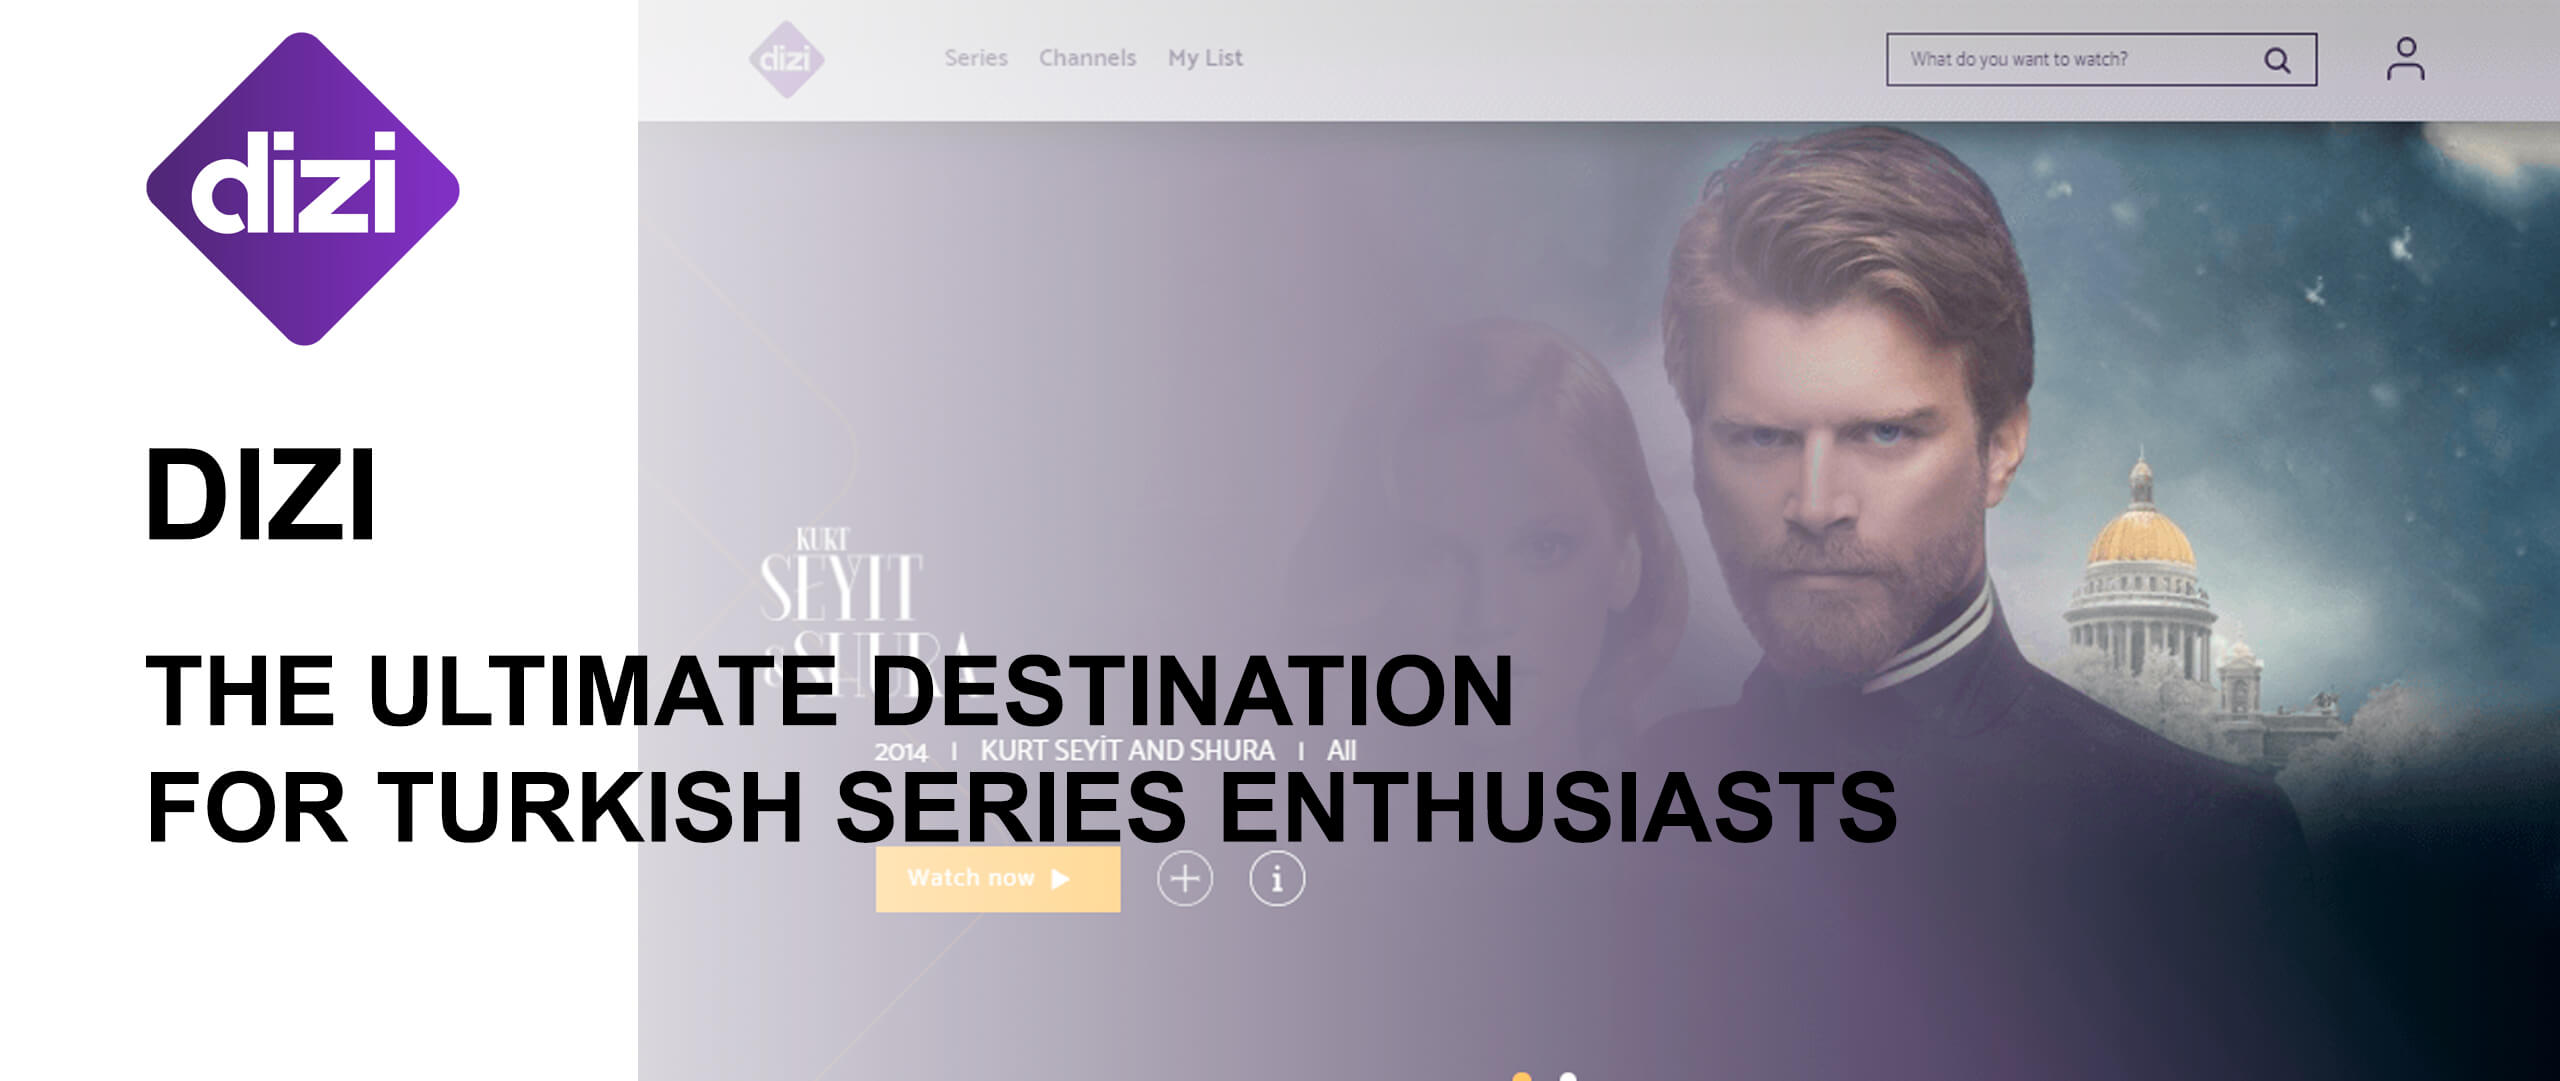 THE ULTIMATE DESTINATION FOR TURKISH SERIES ENTHUSIASTS